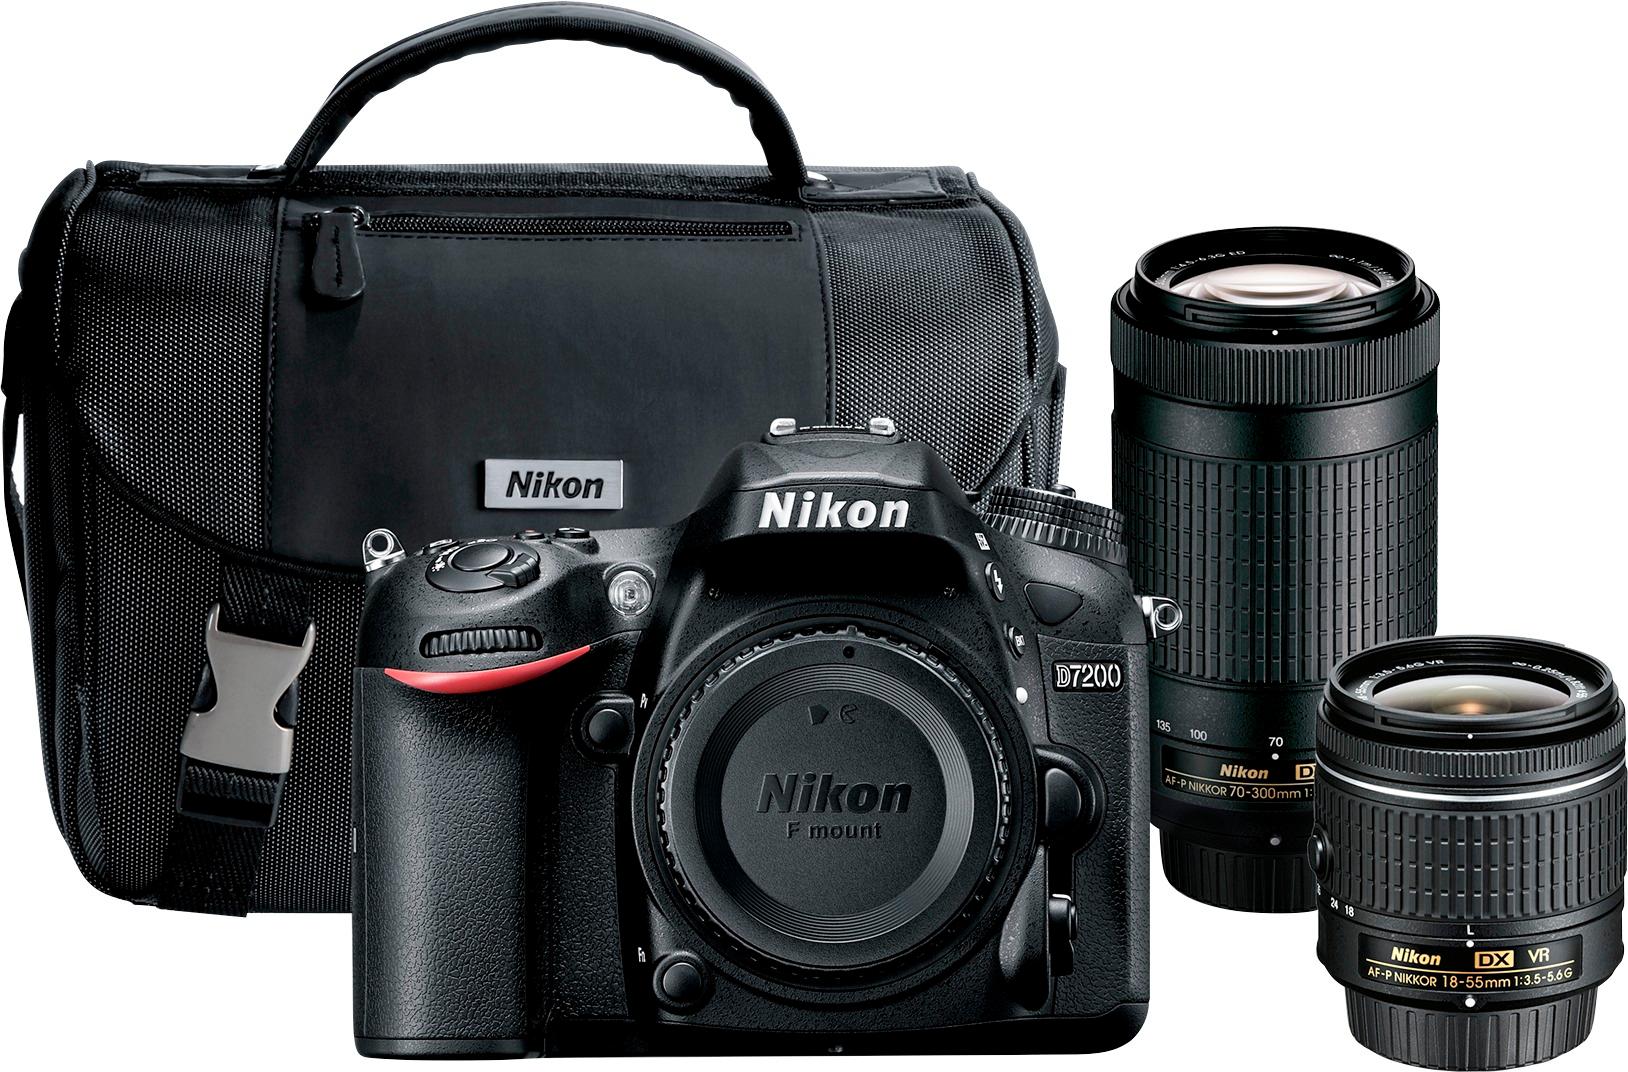 stress Persona Sicily Best Buy: Nikon D7200 DSLR Camera with 18-55mm and 70-300mm Lenses Black  13533